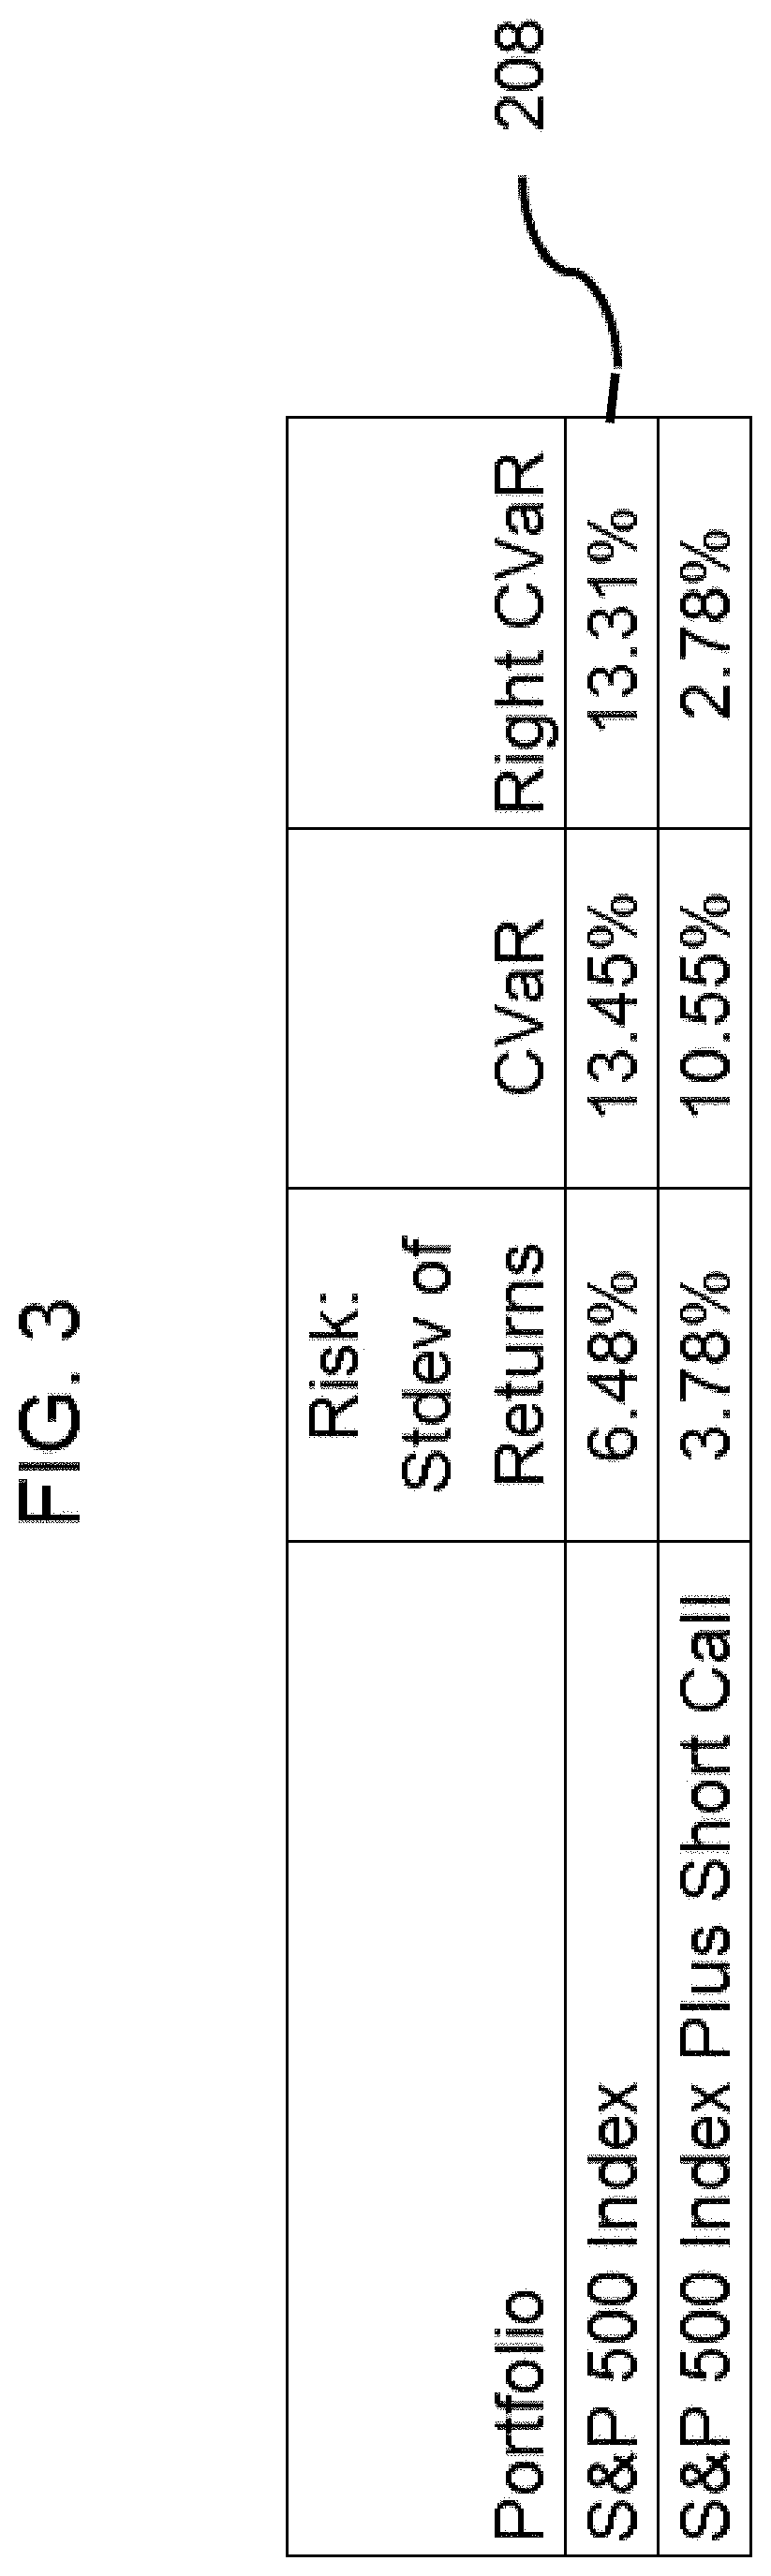 Methods and apparatus employing hierarchical conditional variance to minimize downside risk of a multi-asset class portfolio and improved graphical user interface